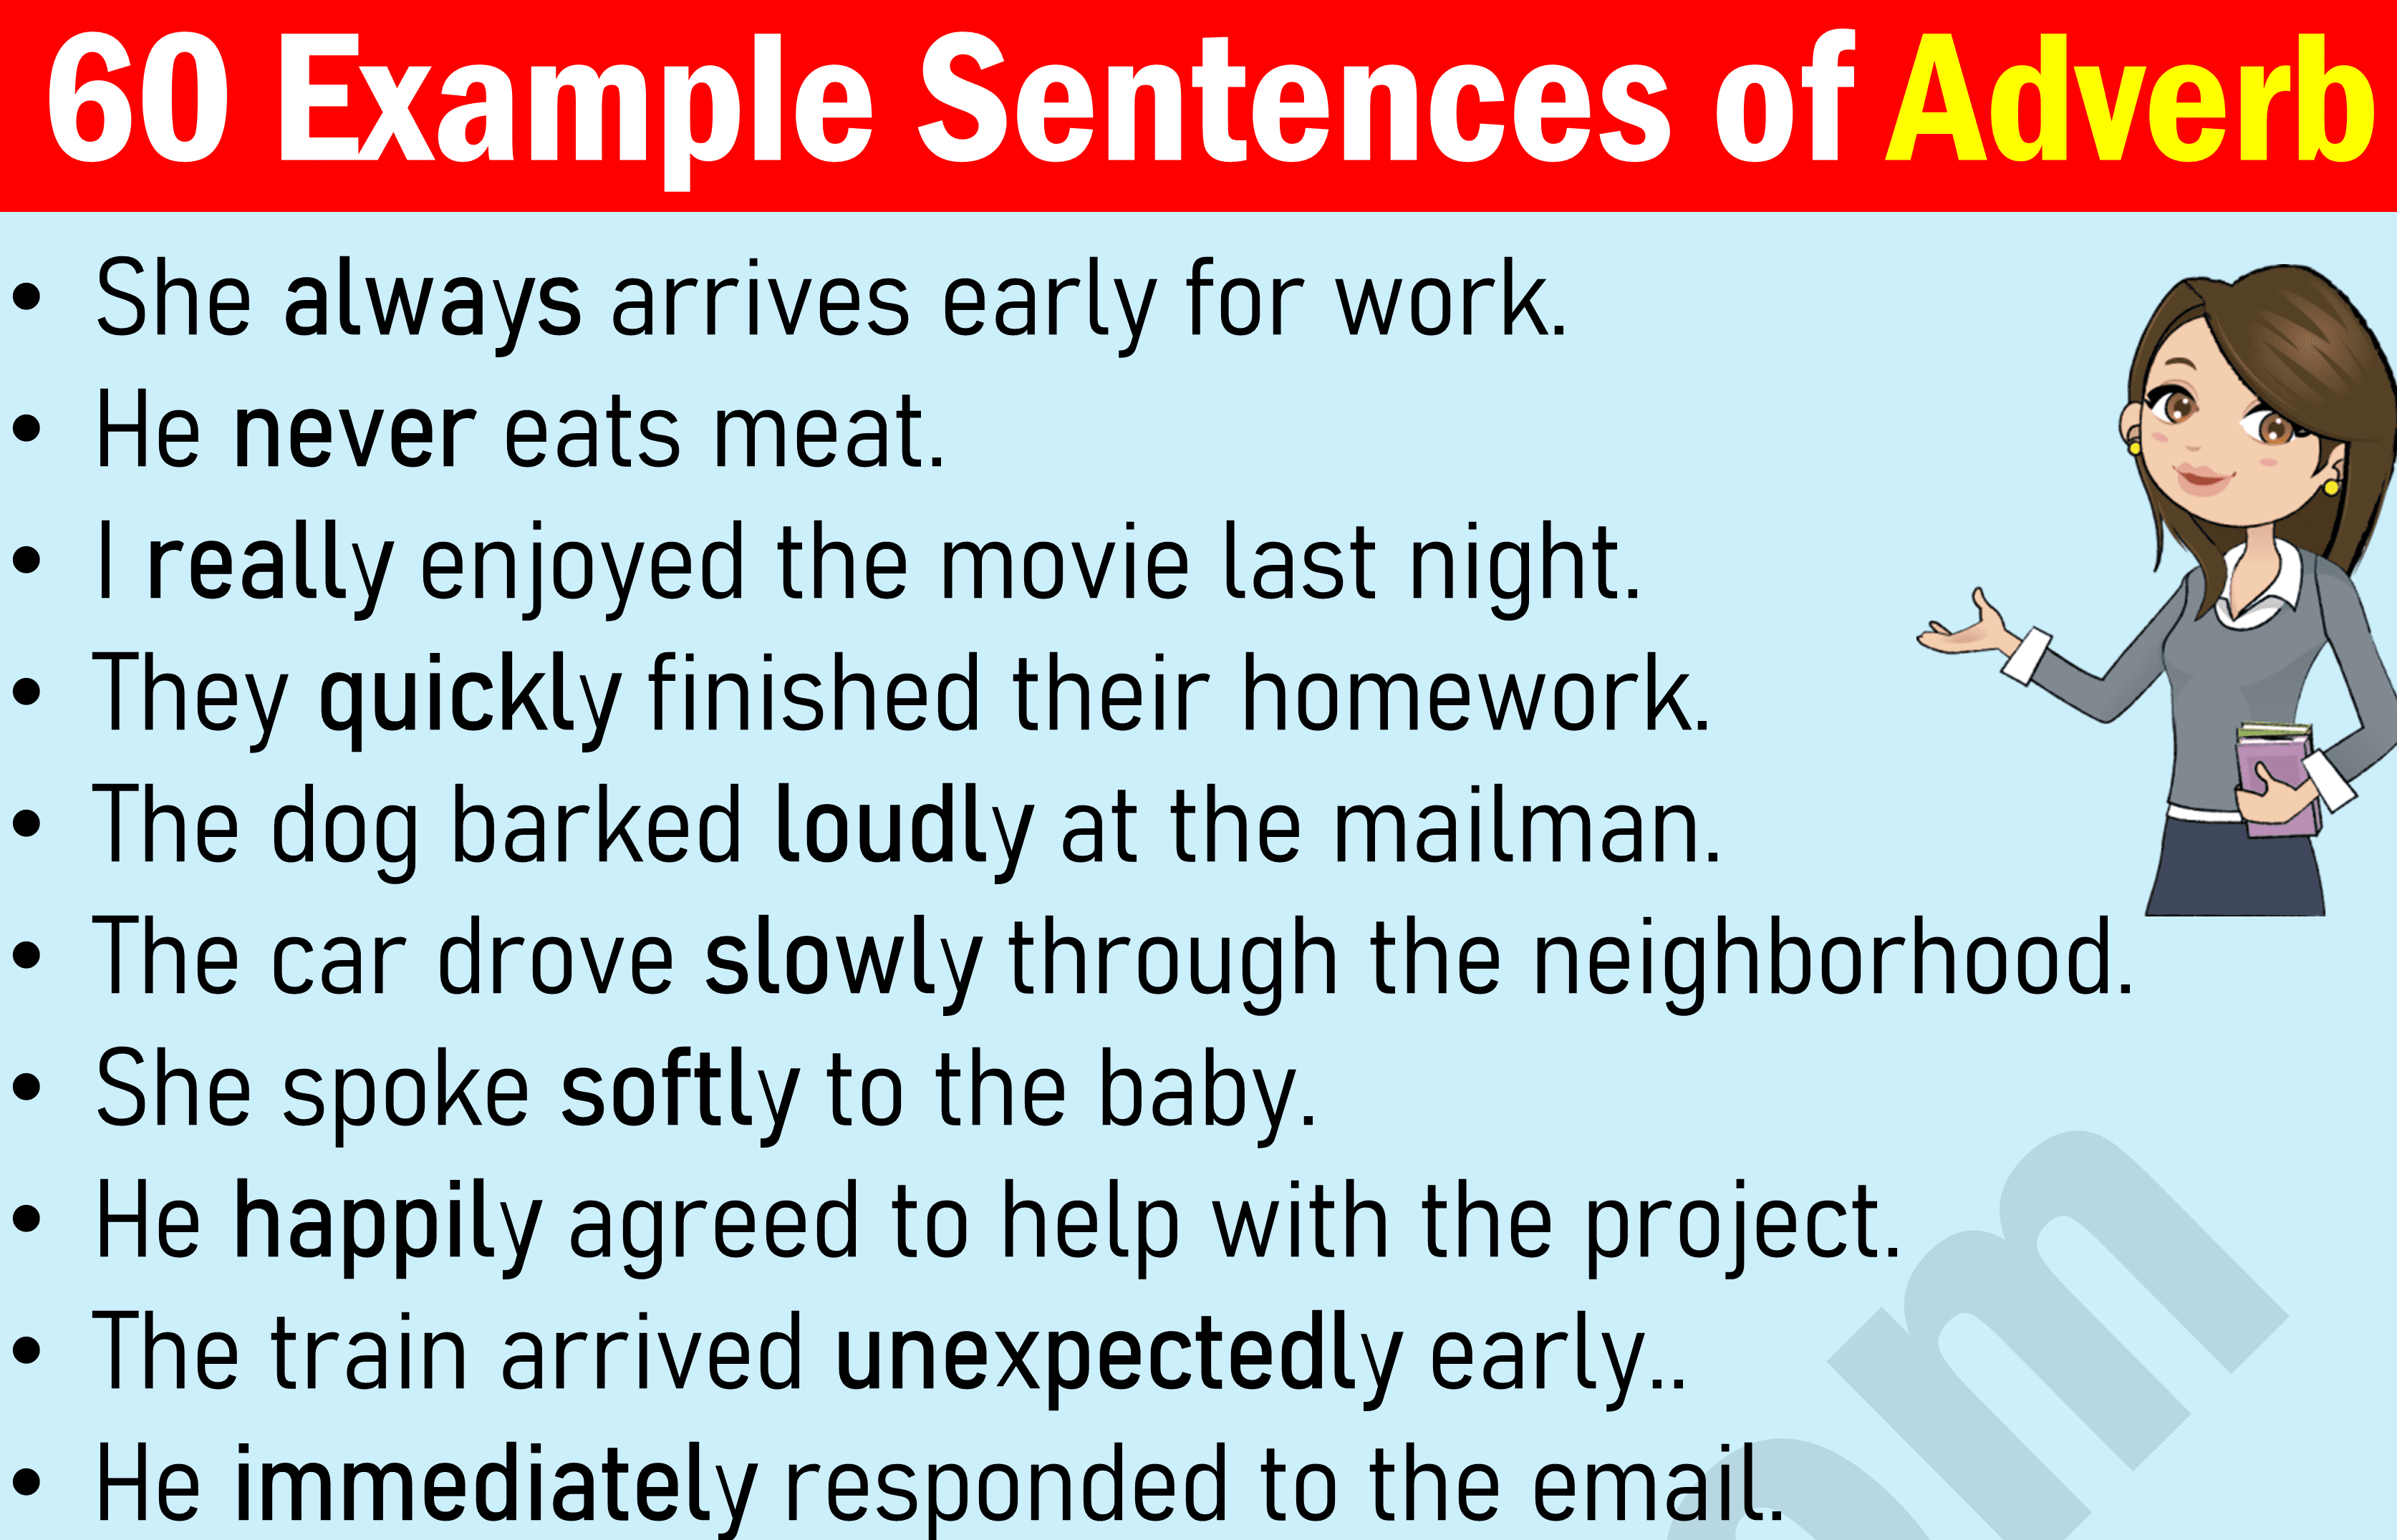 60 Adverb Example Sentences in English